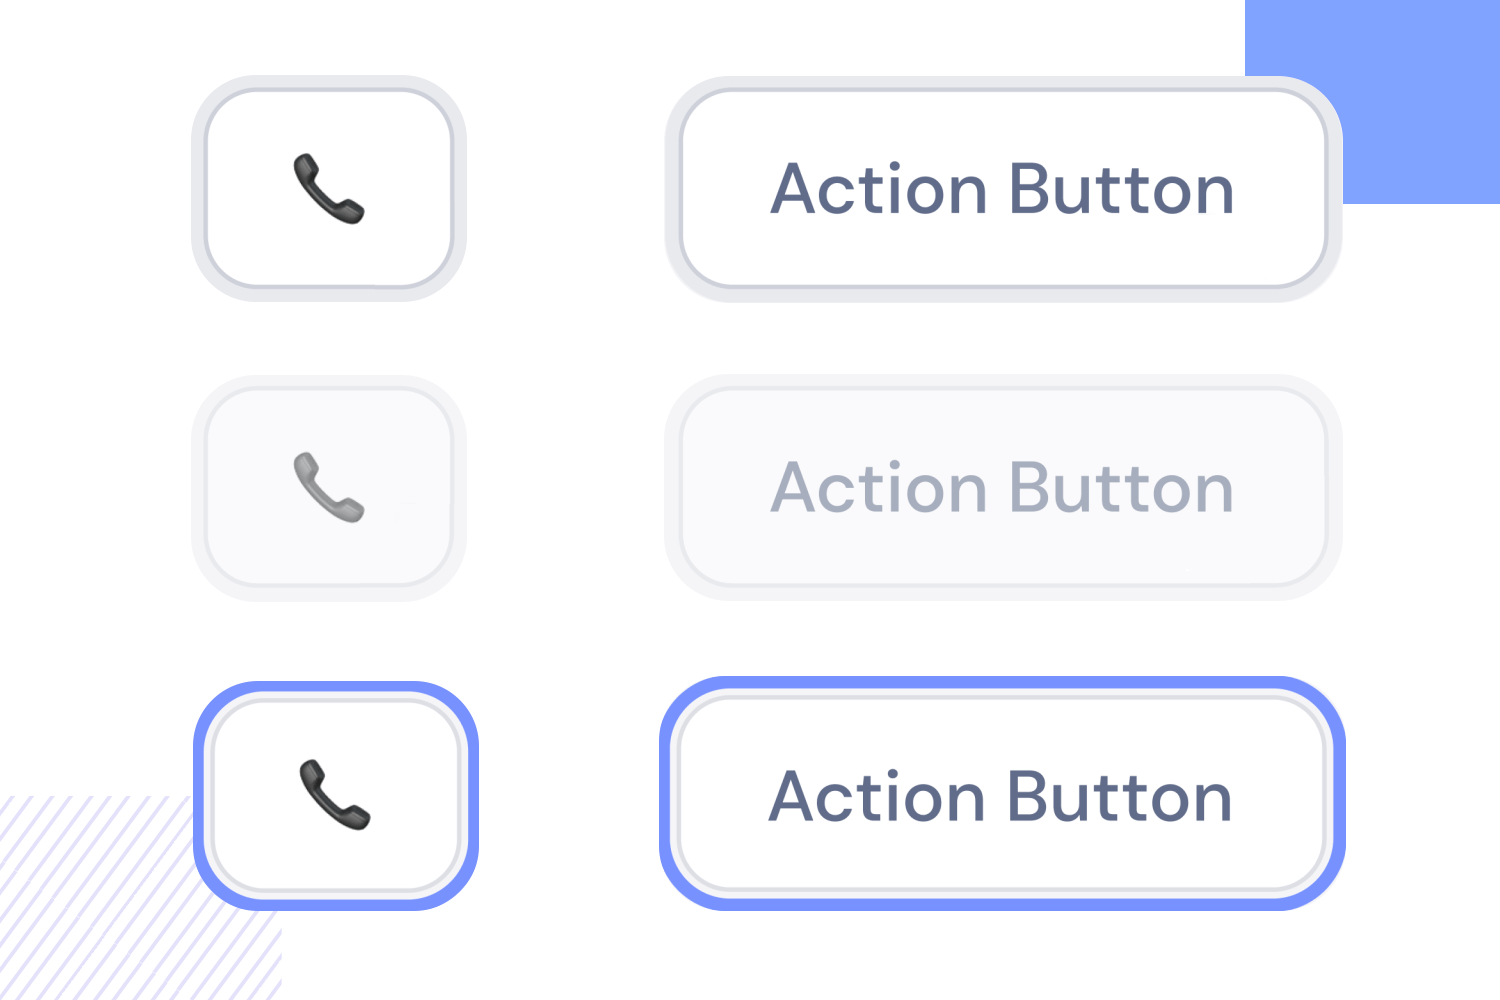 Action button with call icon in various states: default, hover, and focus